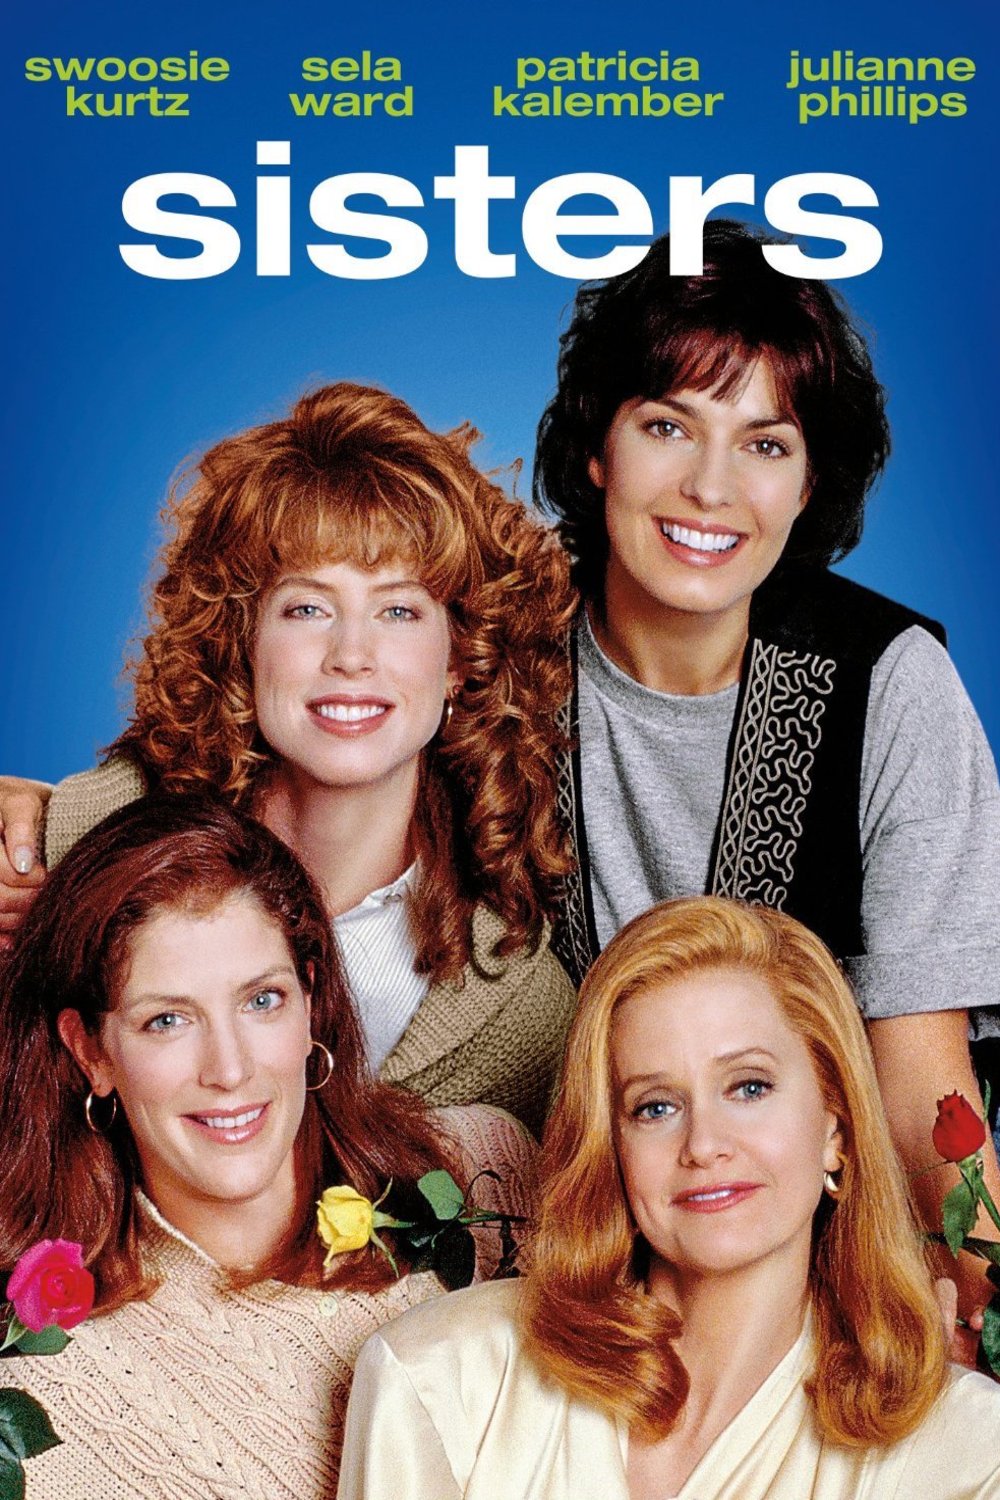 Poster of the movie Sisters